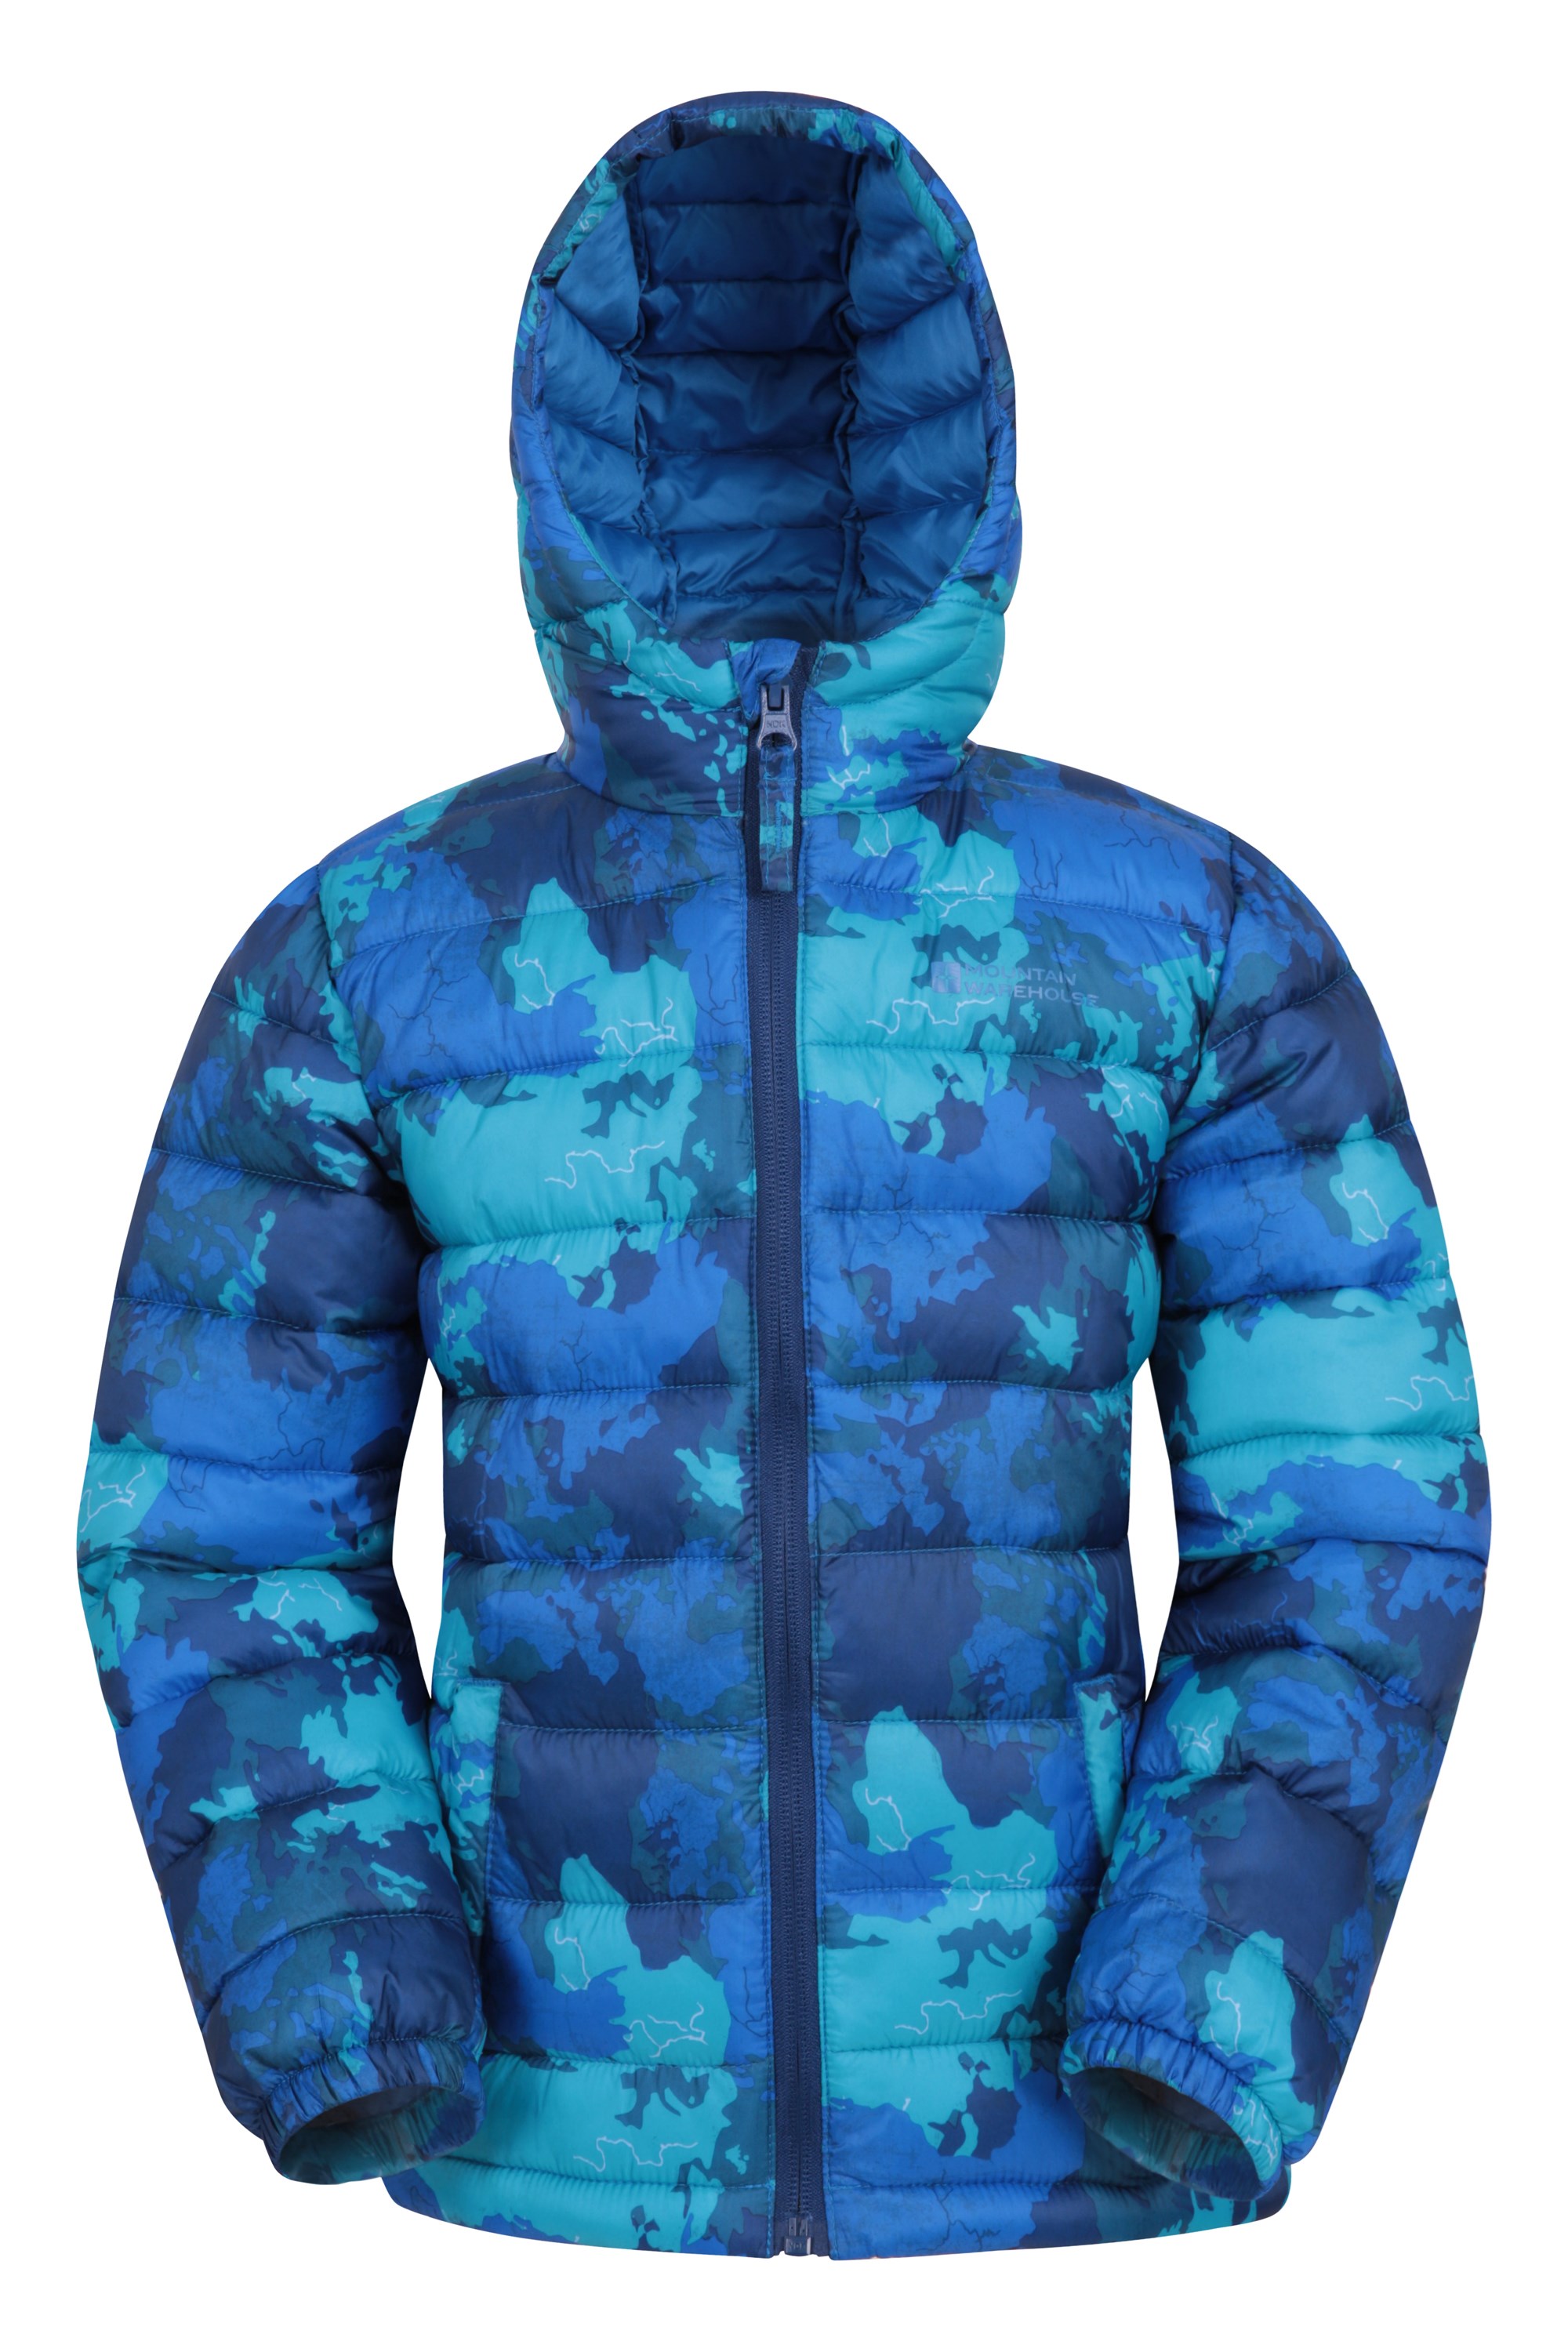 Mountain Warehouse Printed Mens Jacket Water-resistant & Lightweight 